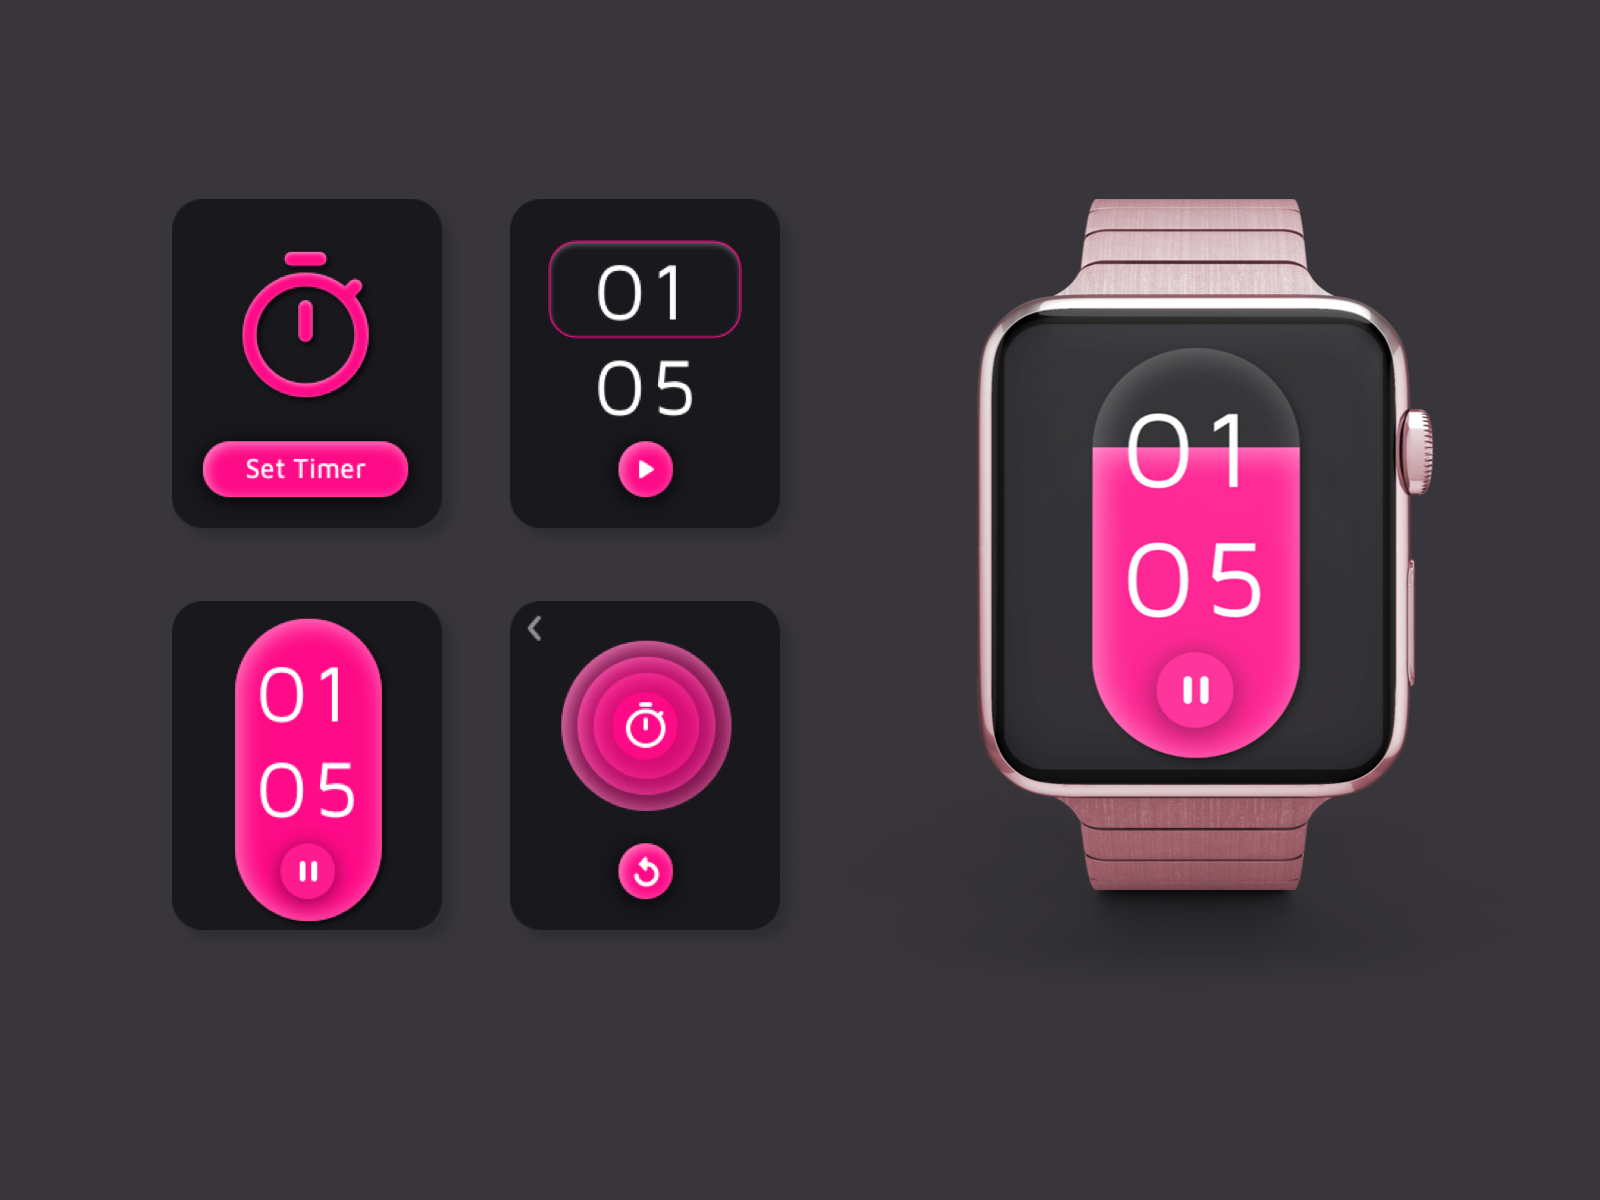 Countdown timer Apple Watch concept by Anna Bukati on